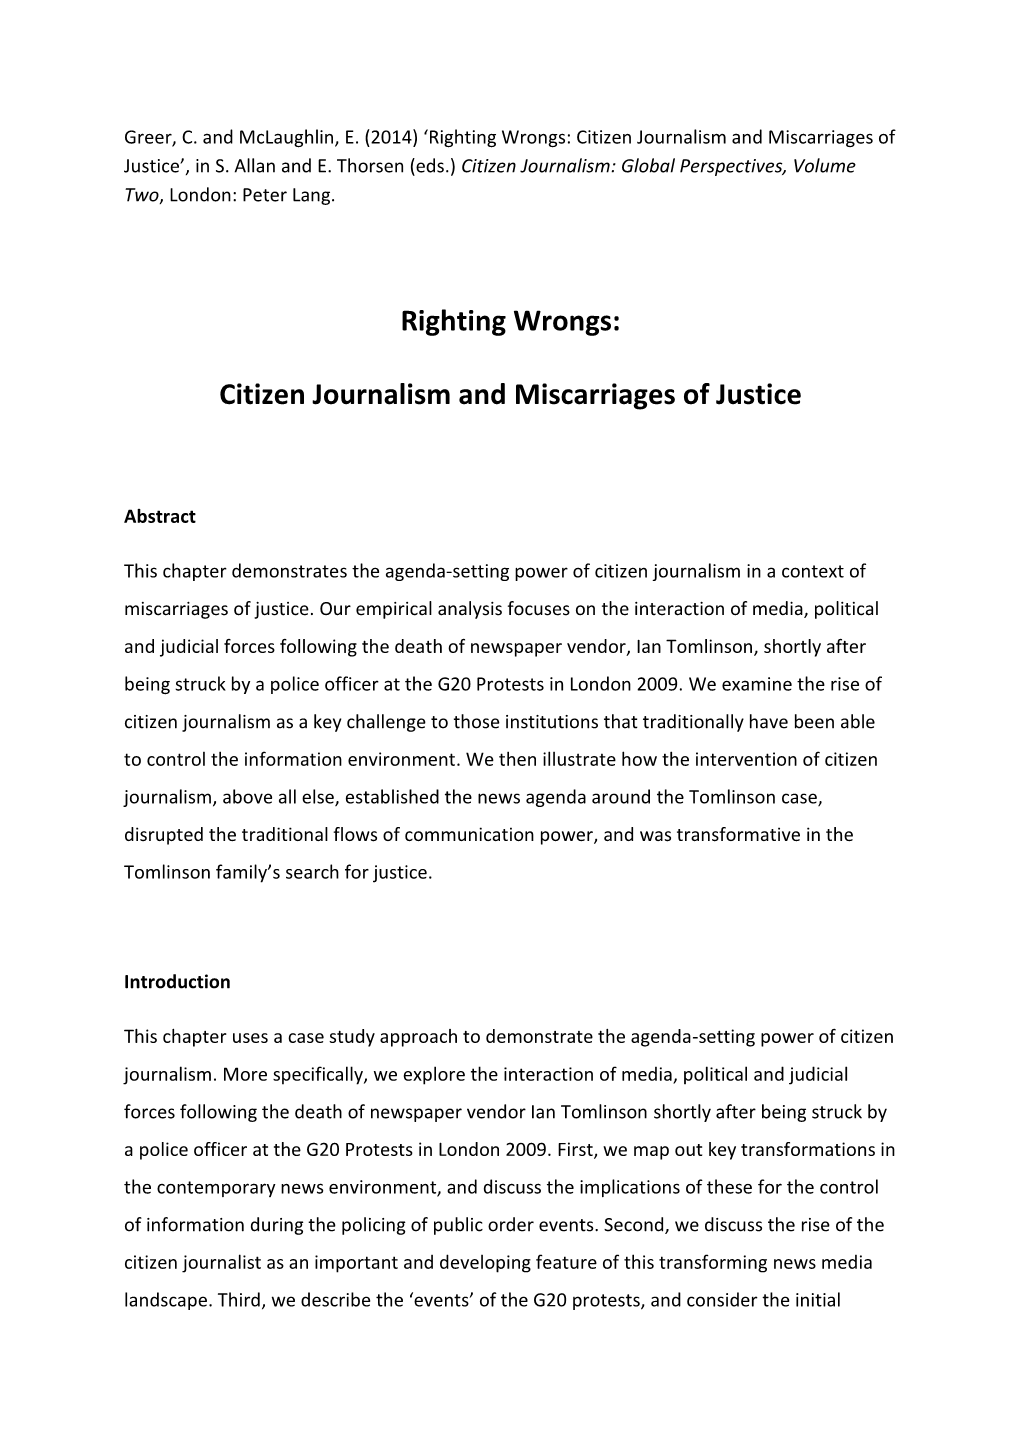 Righting Wrongs: Citizen Journalism and Miscarriages of Justice’, in S